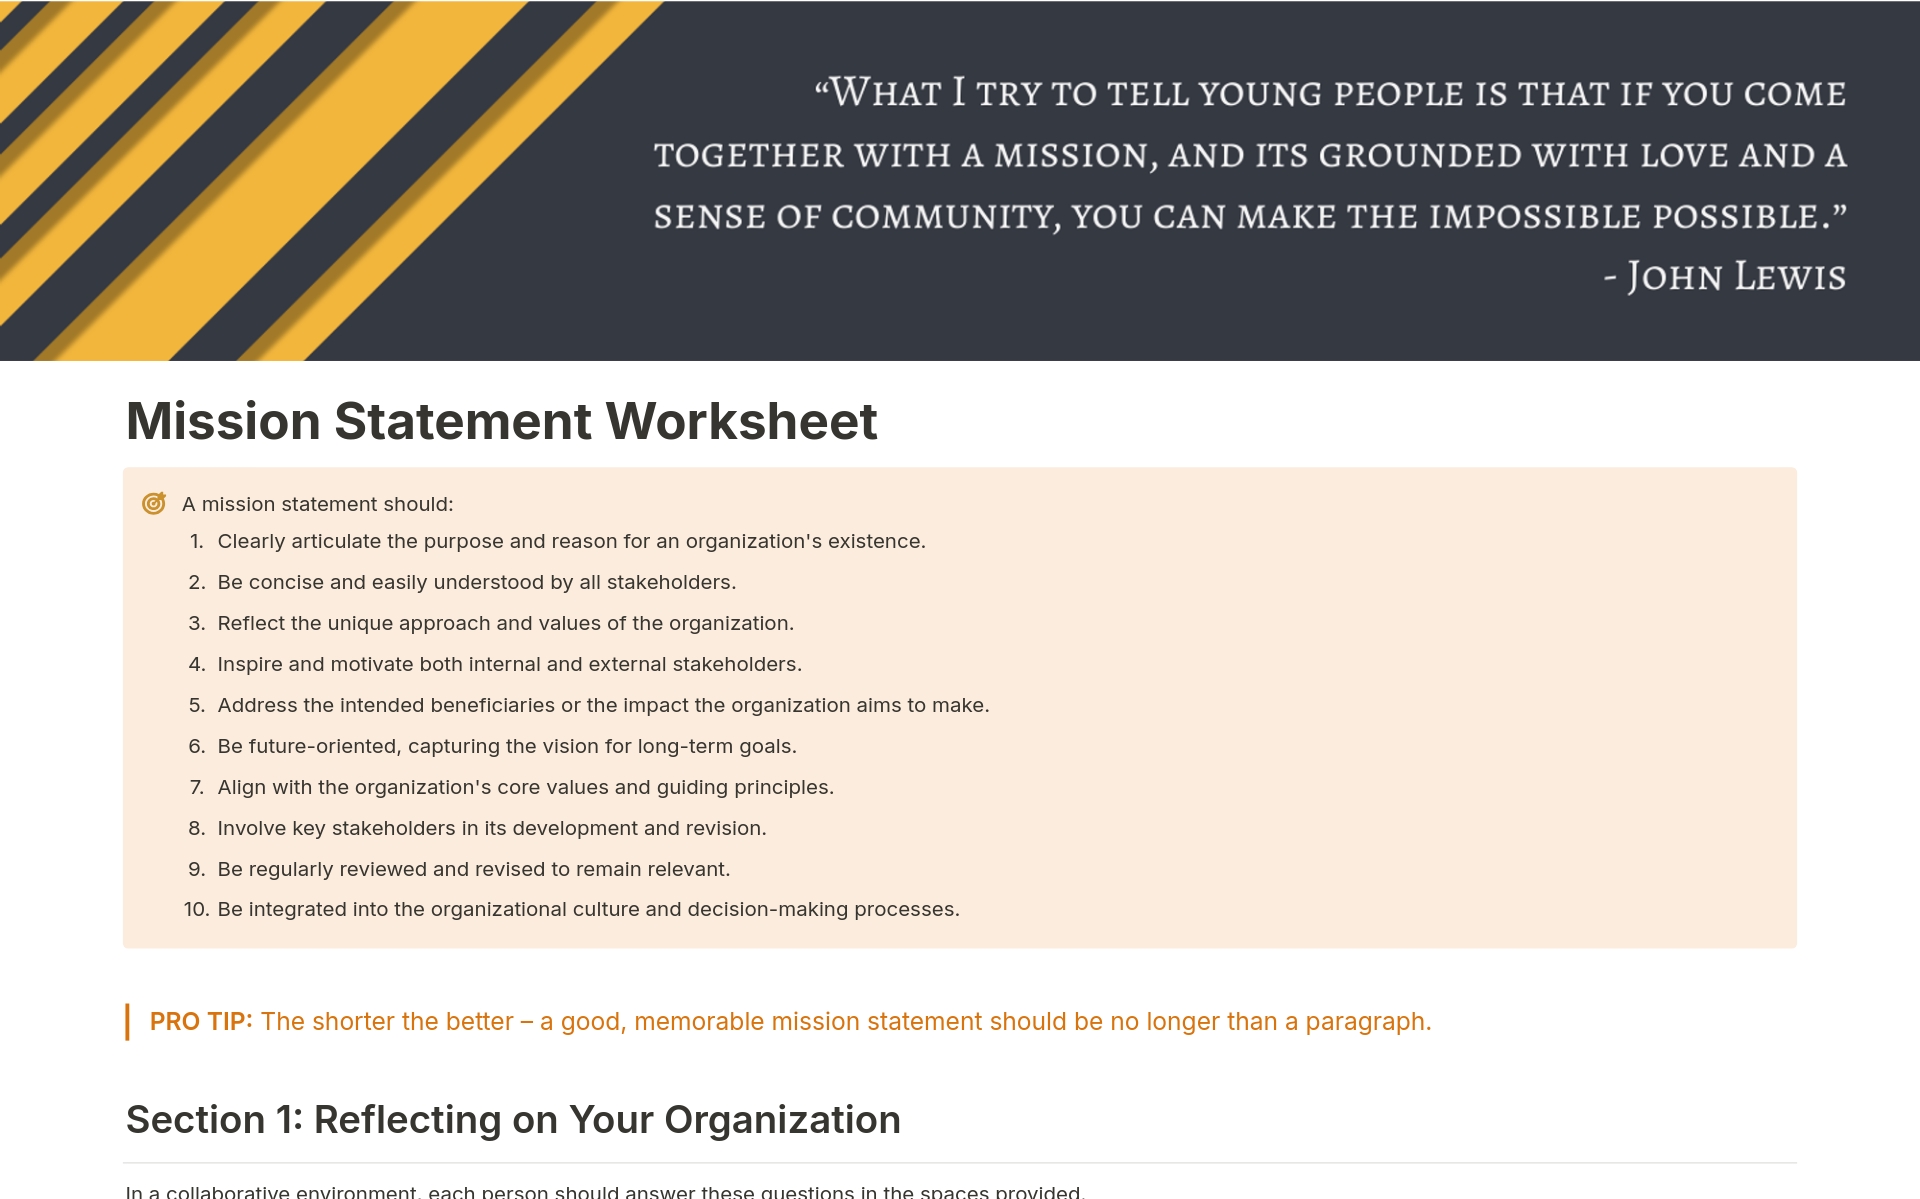 This template is a comprehensive and user-friendly tool designed to assist organizations in developing and refining their mission statement. By utilizing this template, organizations can craft a concise and powerful mission statement that effectively communicates their purpose.